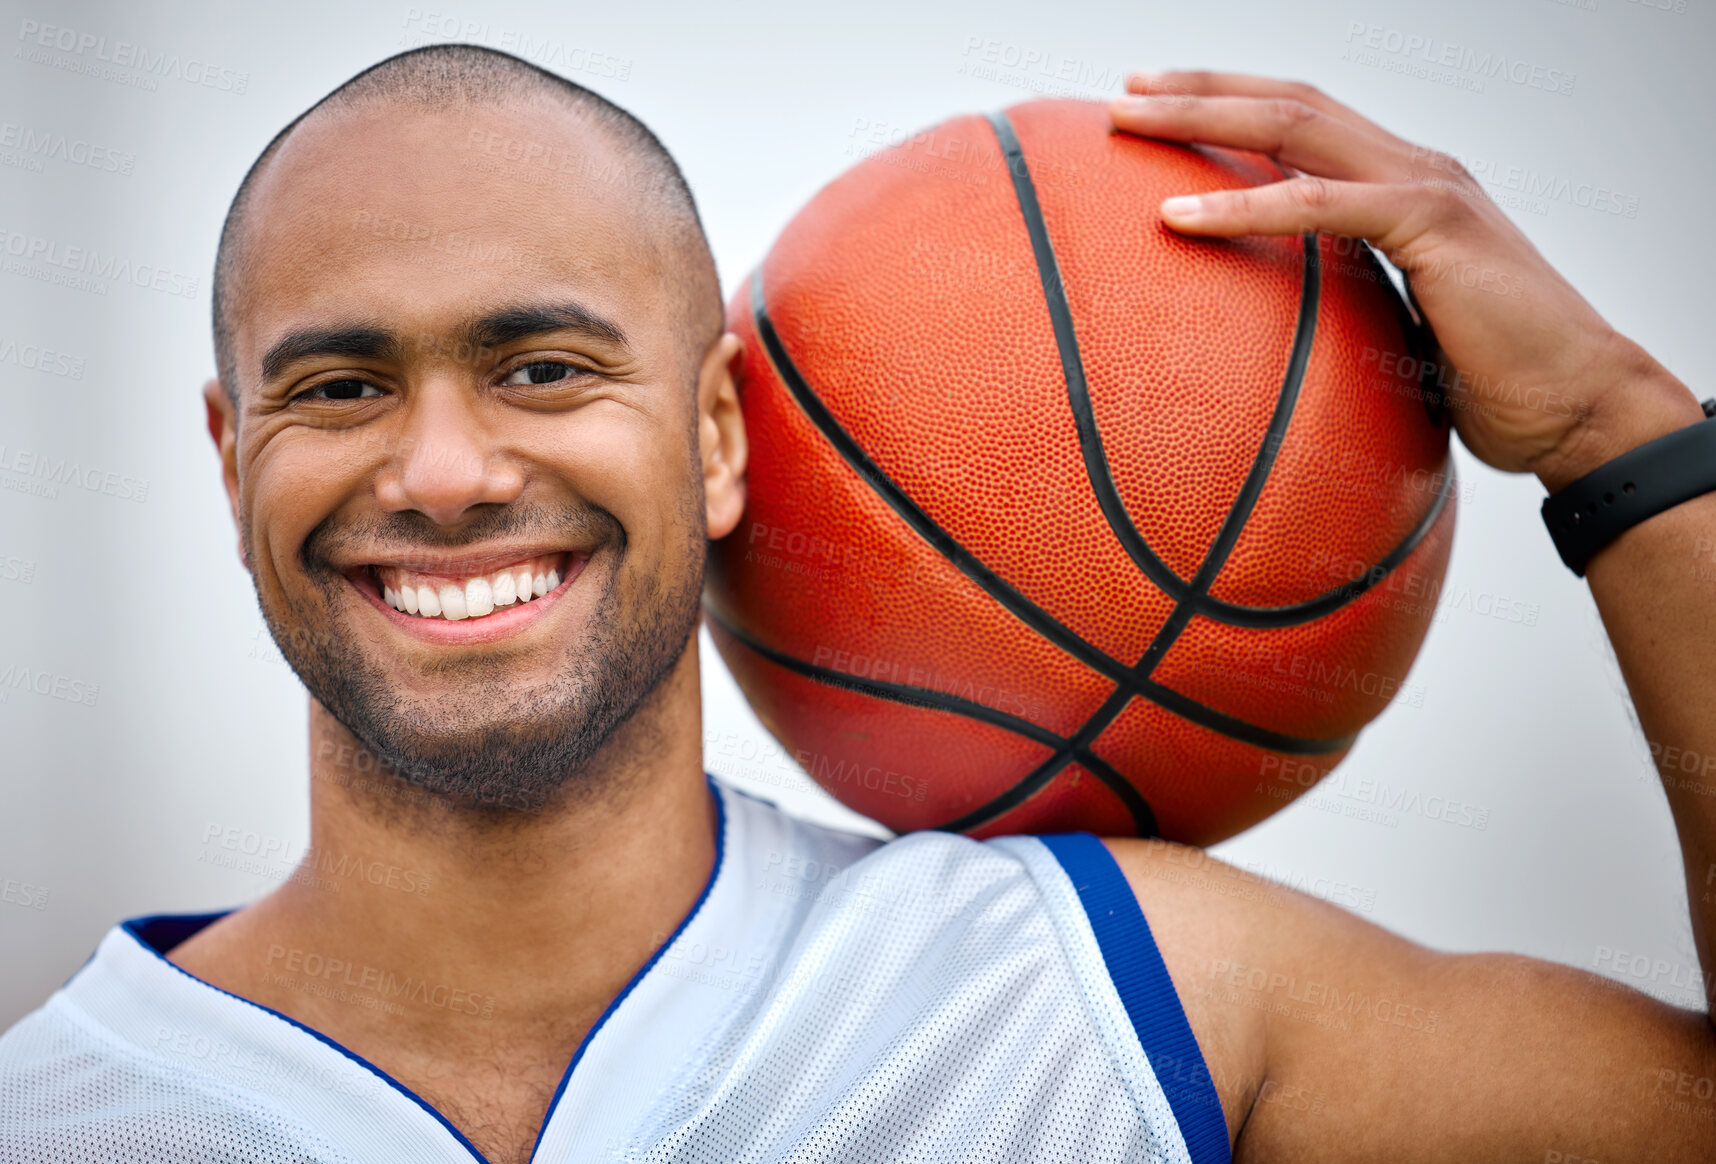 Buy stock photo Cropped portrait of a handsome young male basketball player standing outside